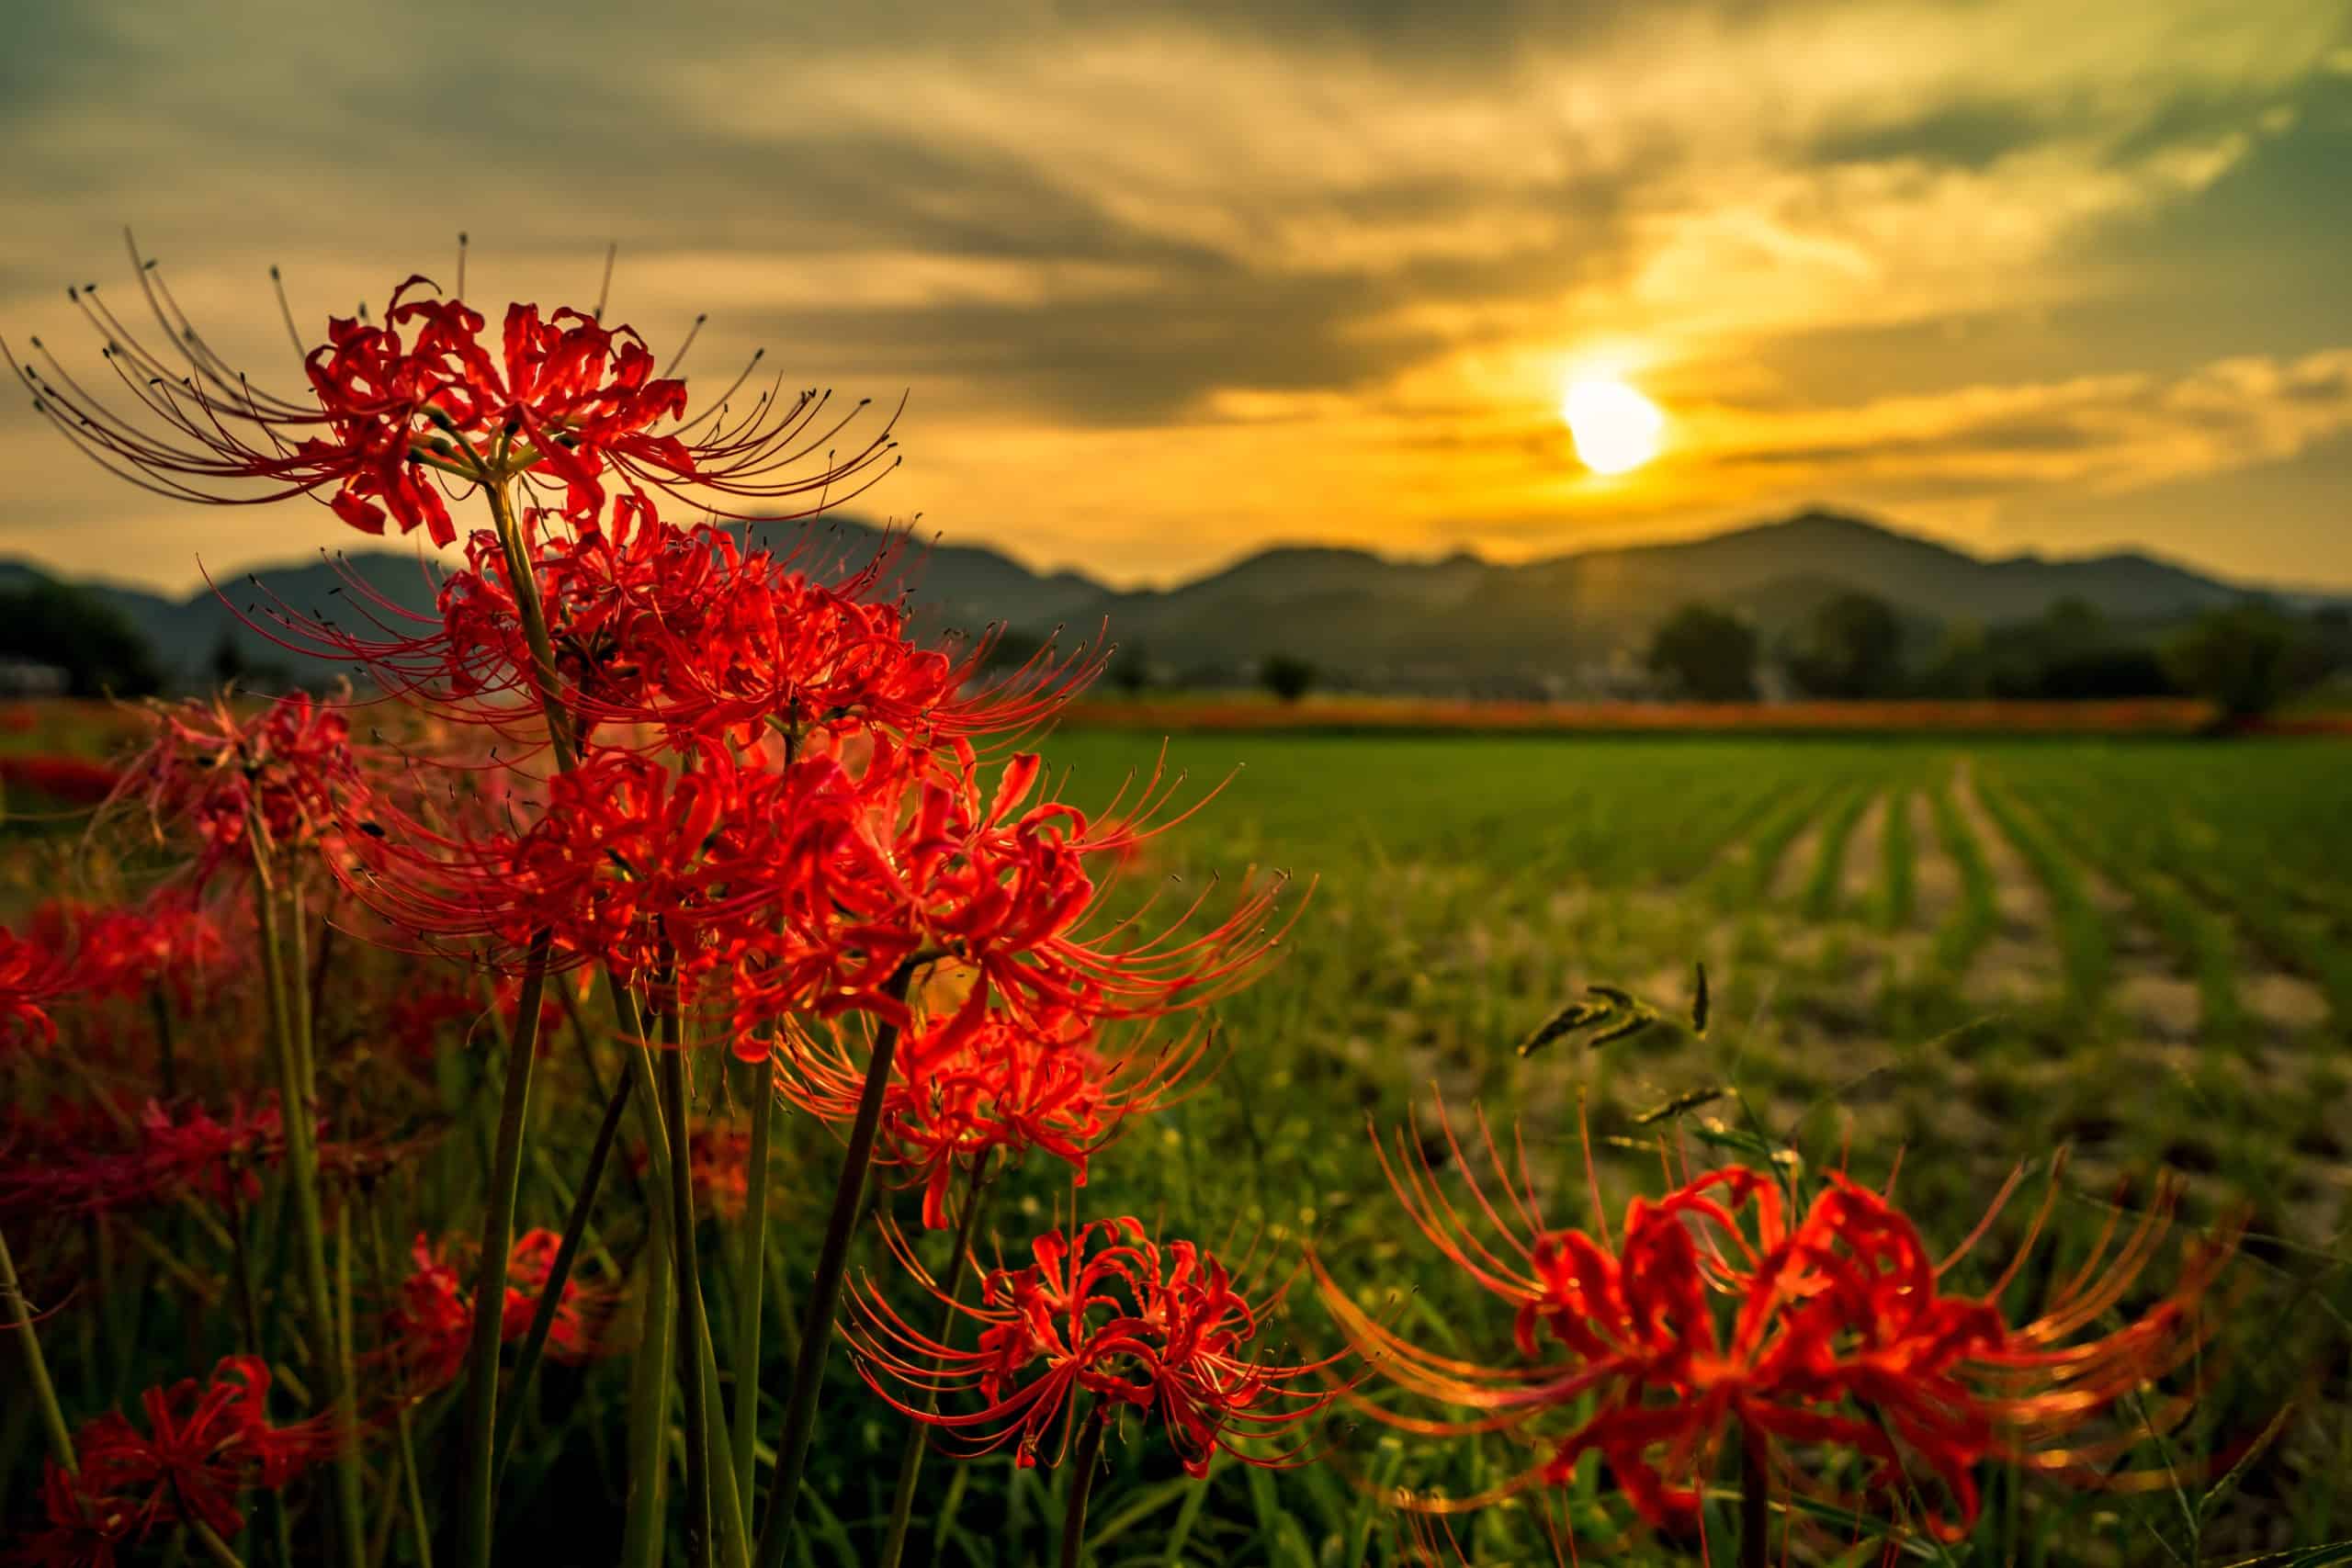 beautiful sunset scenery, red flowers in the field.